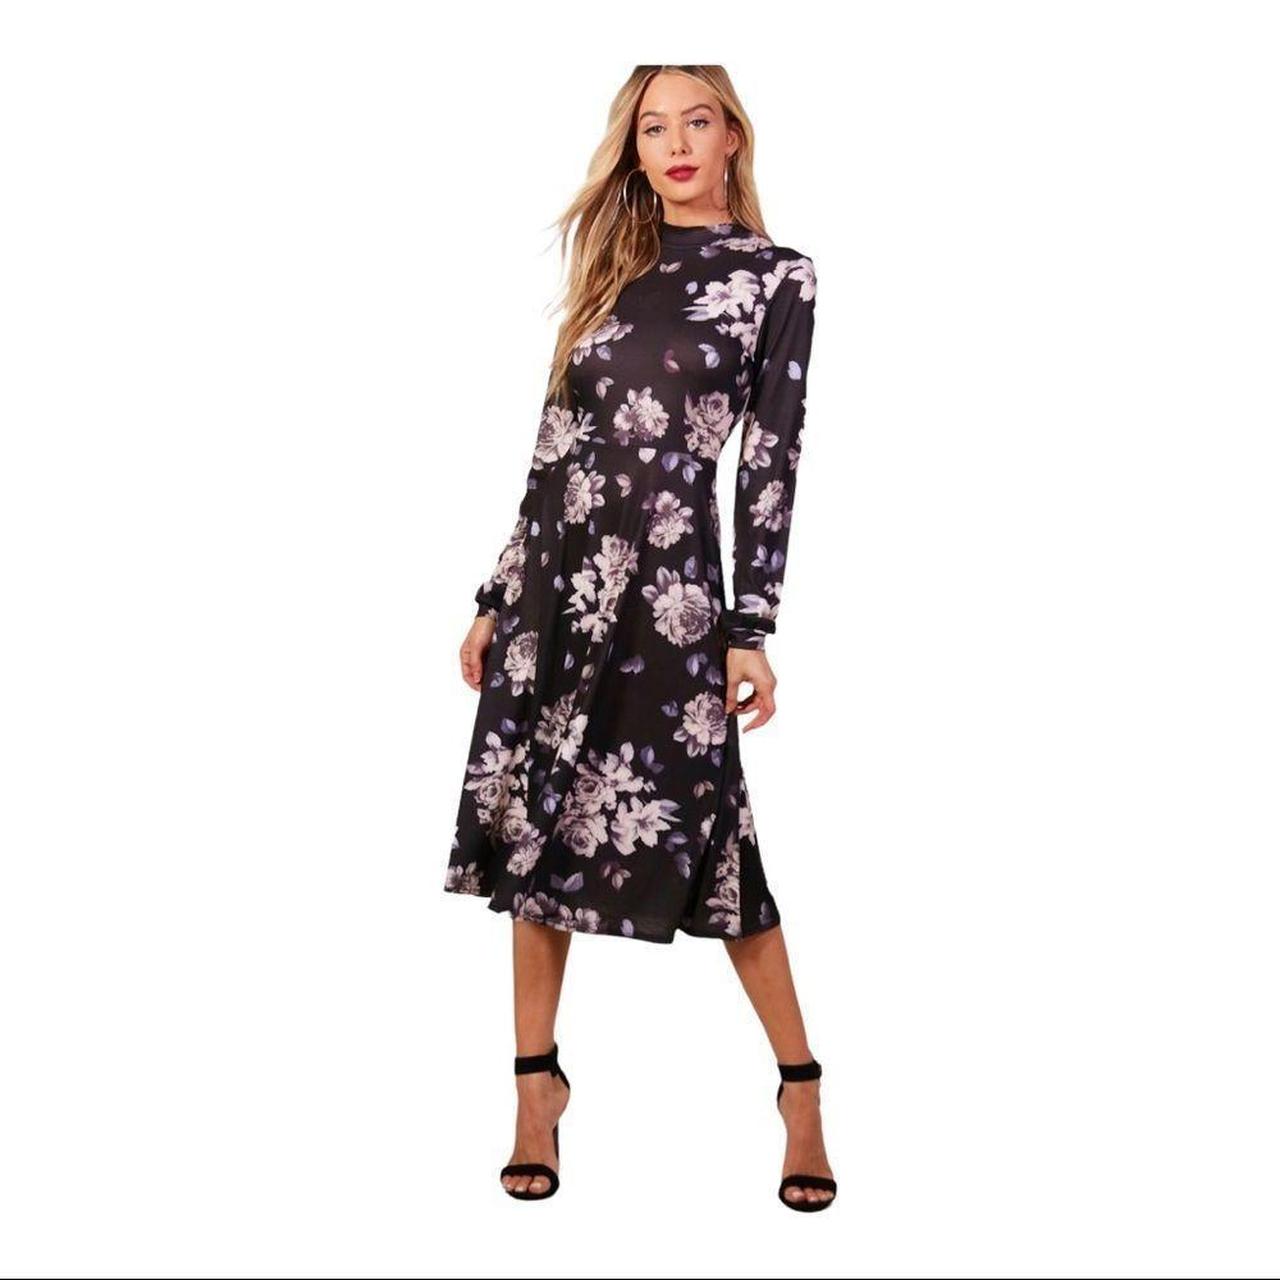 Product Image 1 - Boohoo Black High Neck Floral